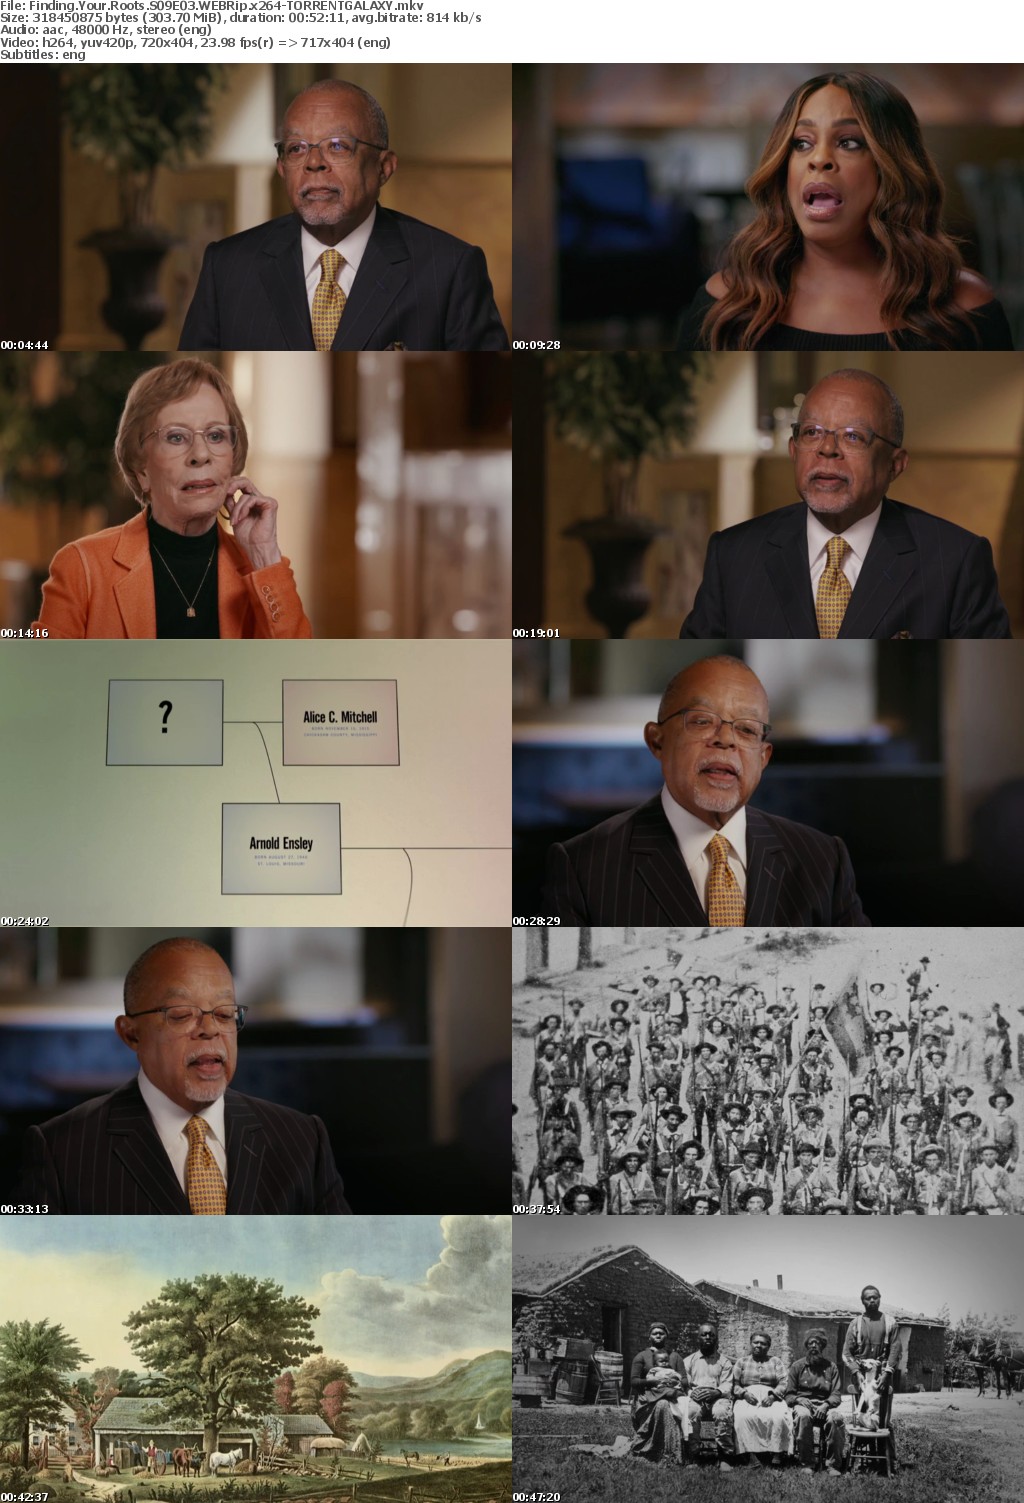 Finding Your Roots S09E03 WEBRip x264-GALAXY